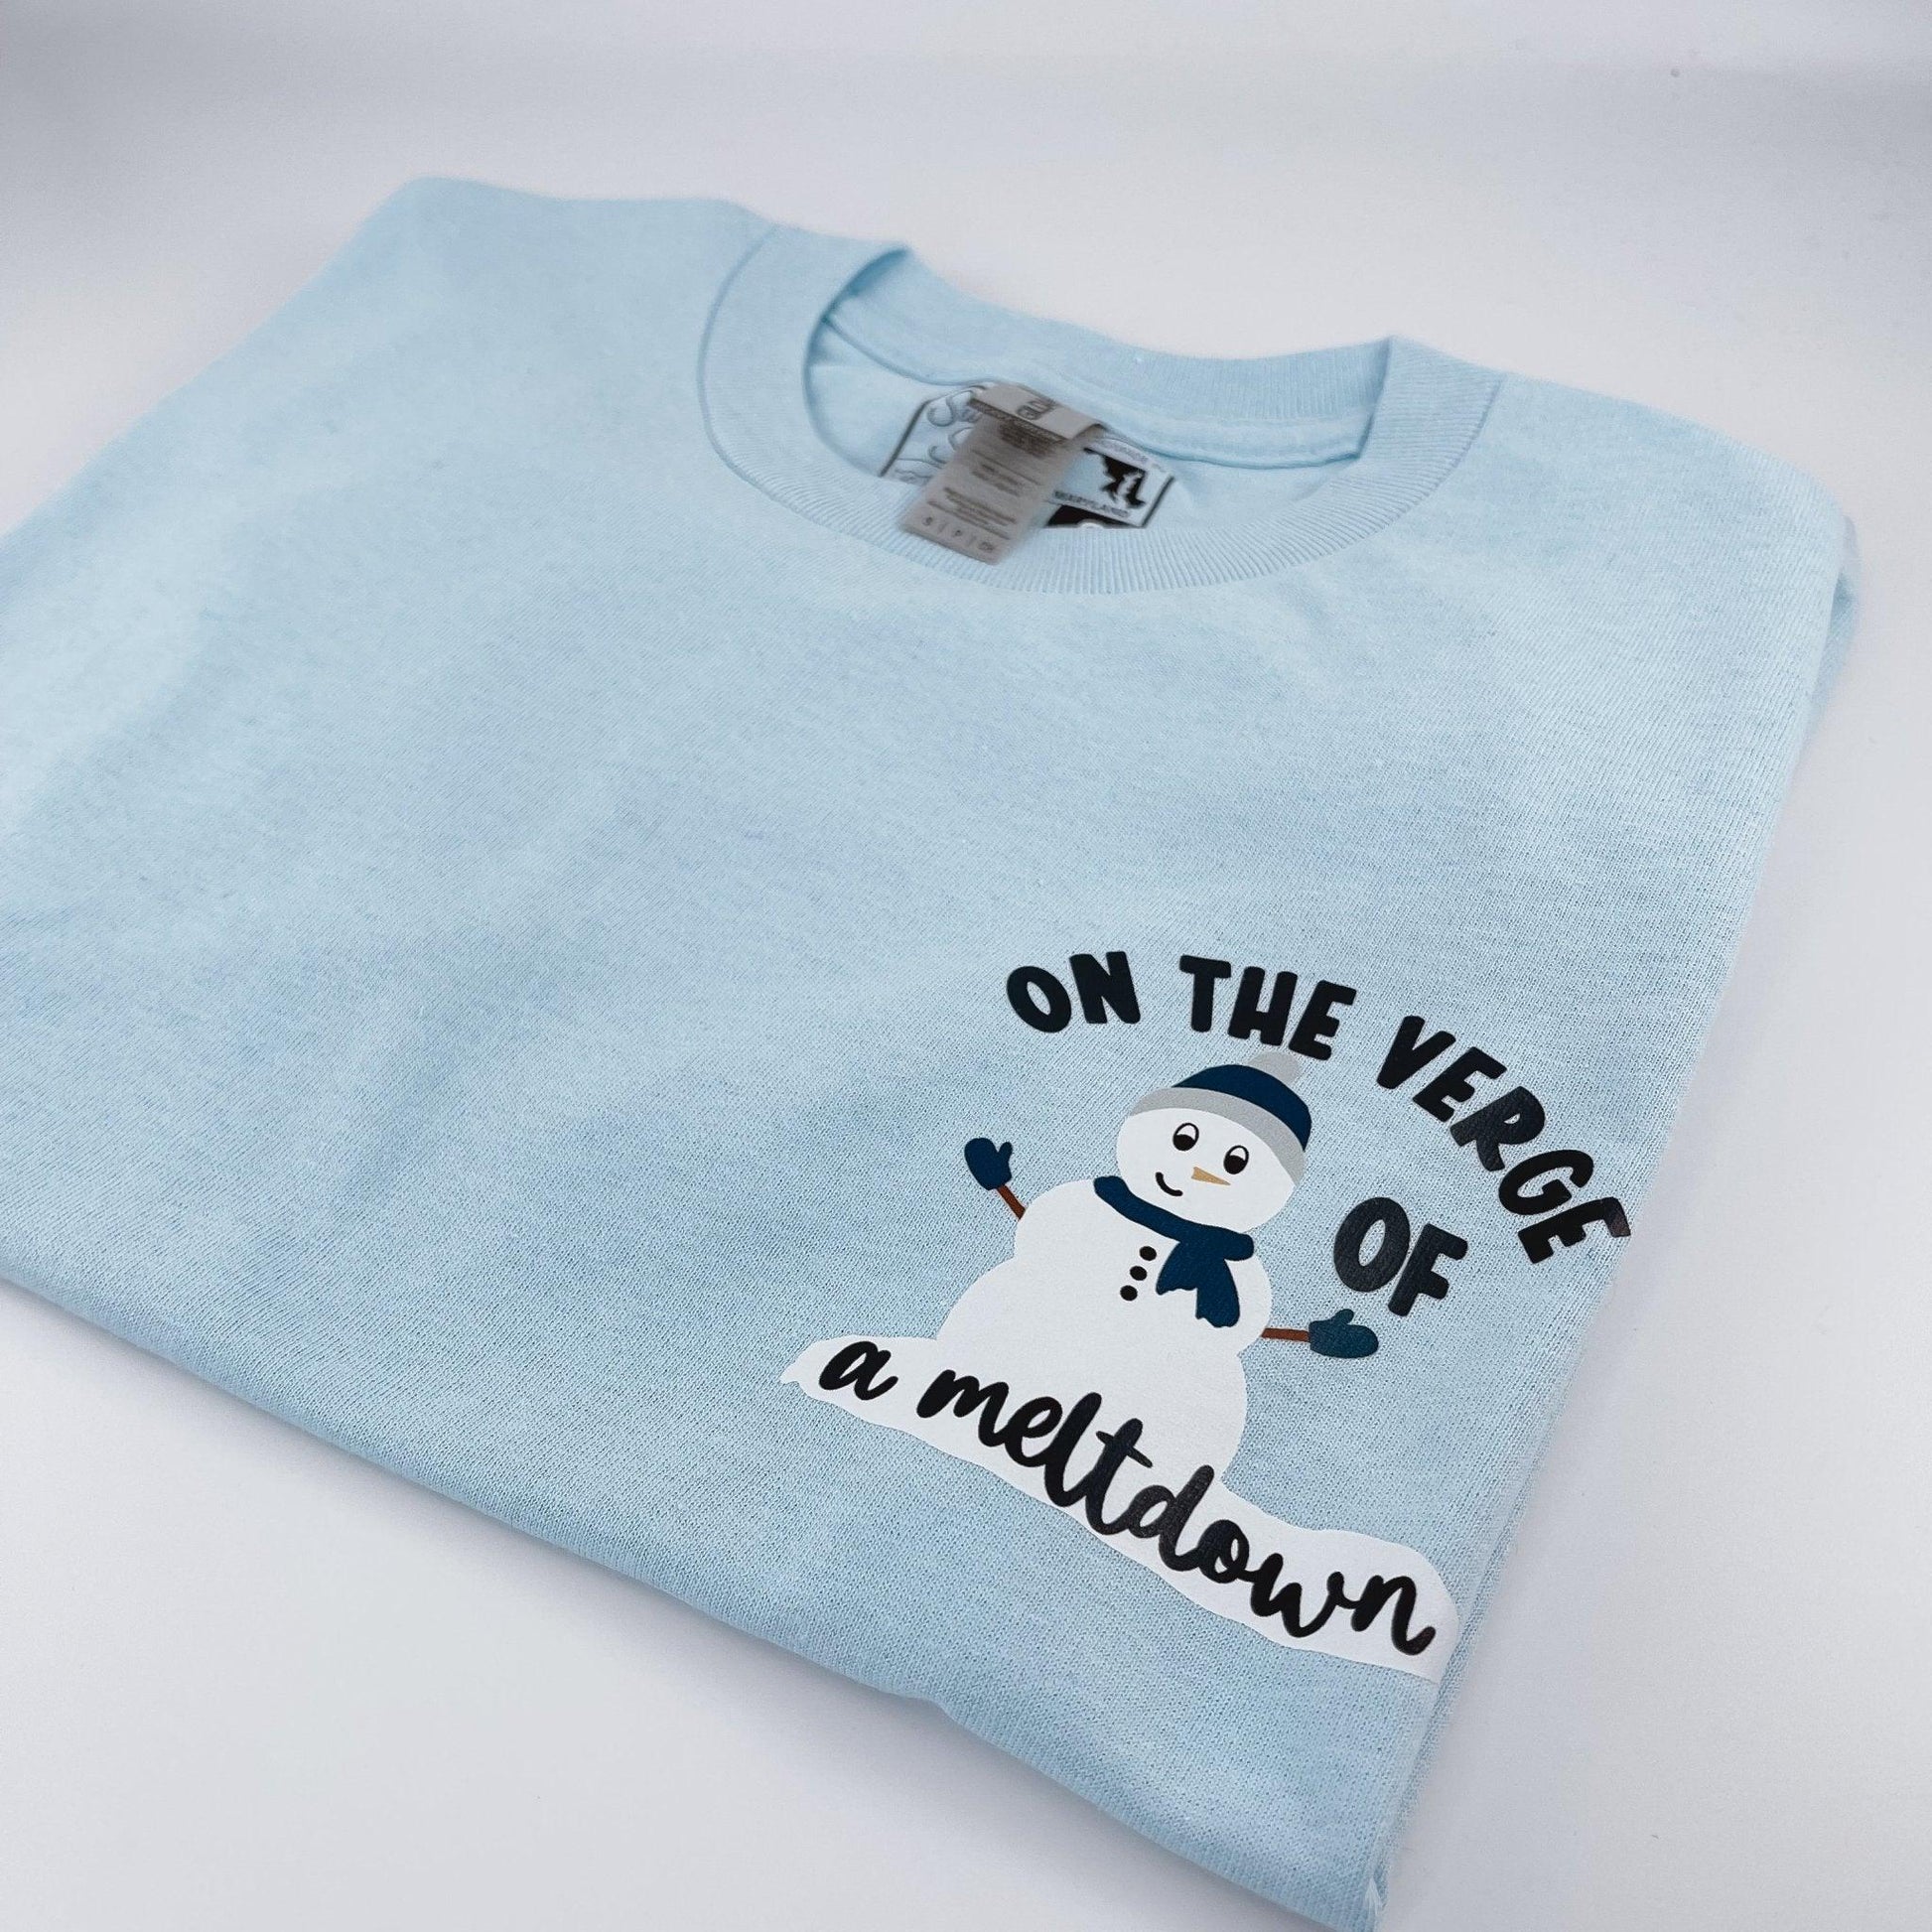 On the Verge of a Meltdown T-Shirt - Sunshine Soul MD